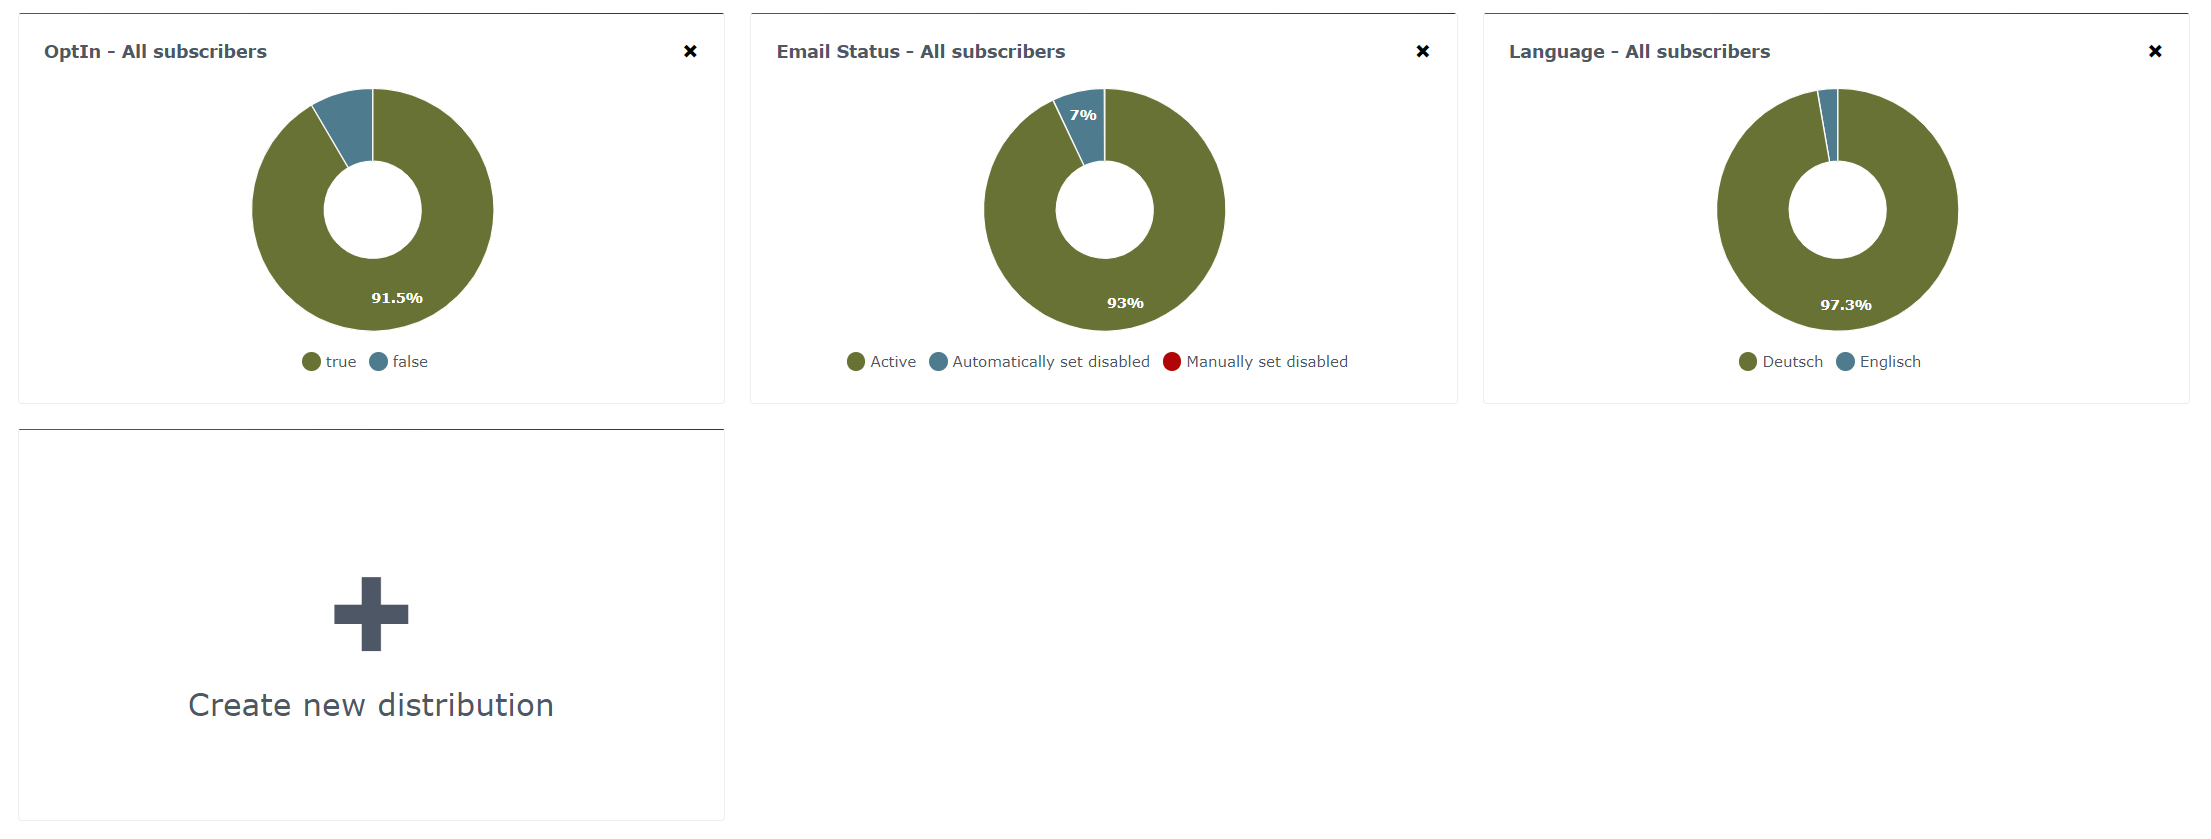 Distribution of subscribers